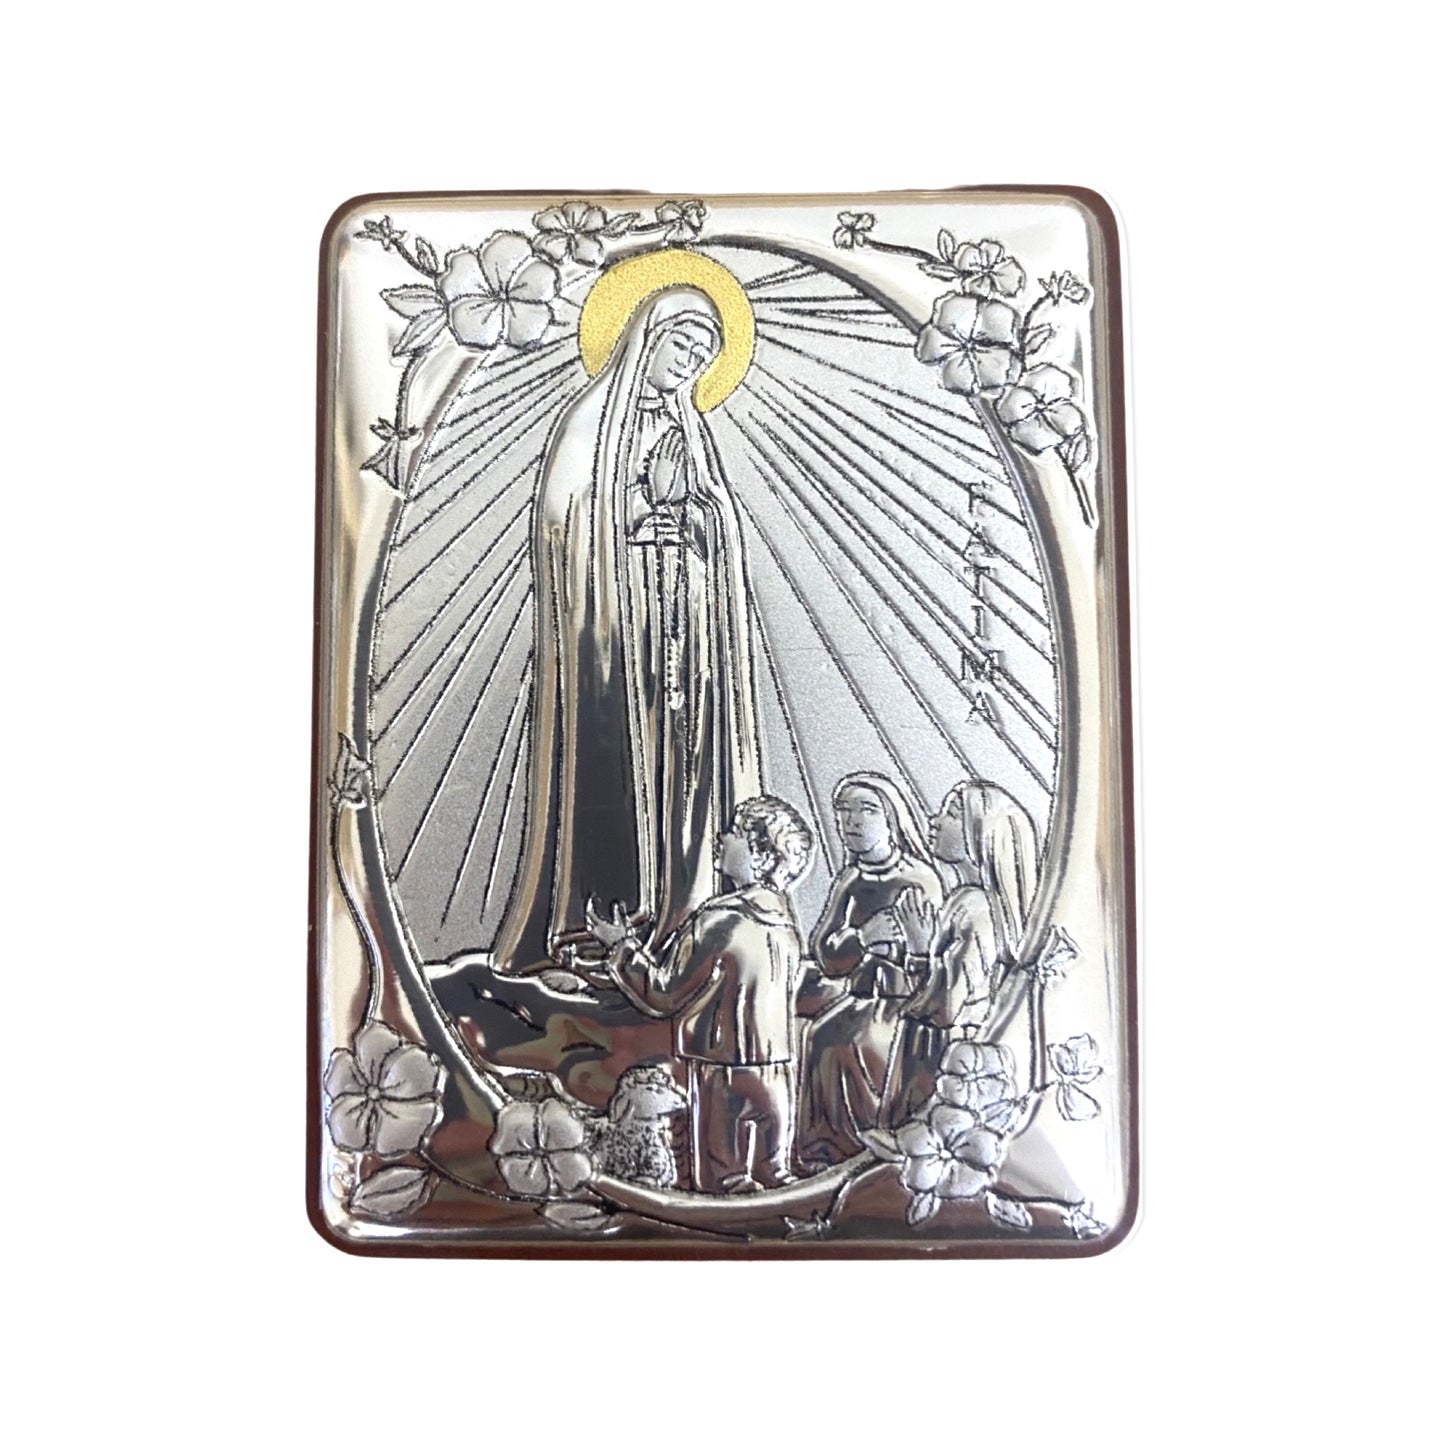 Square Colored Silver Image of Our Lady of Fatima with Shepherd Children